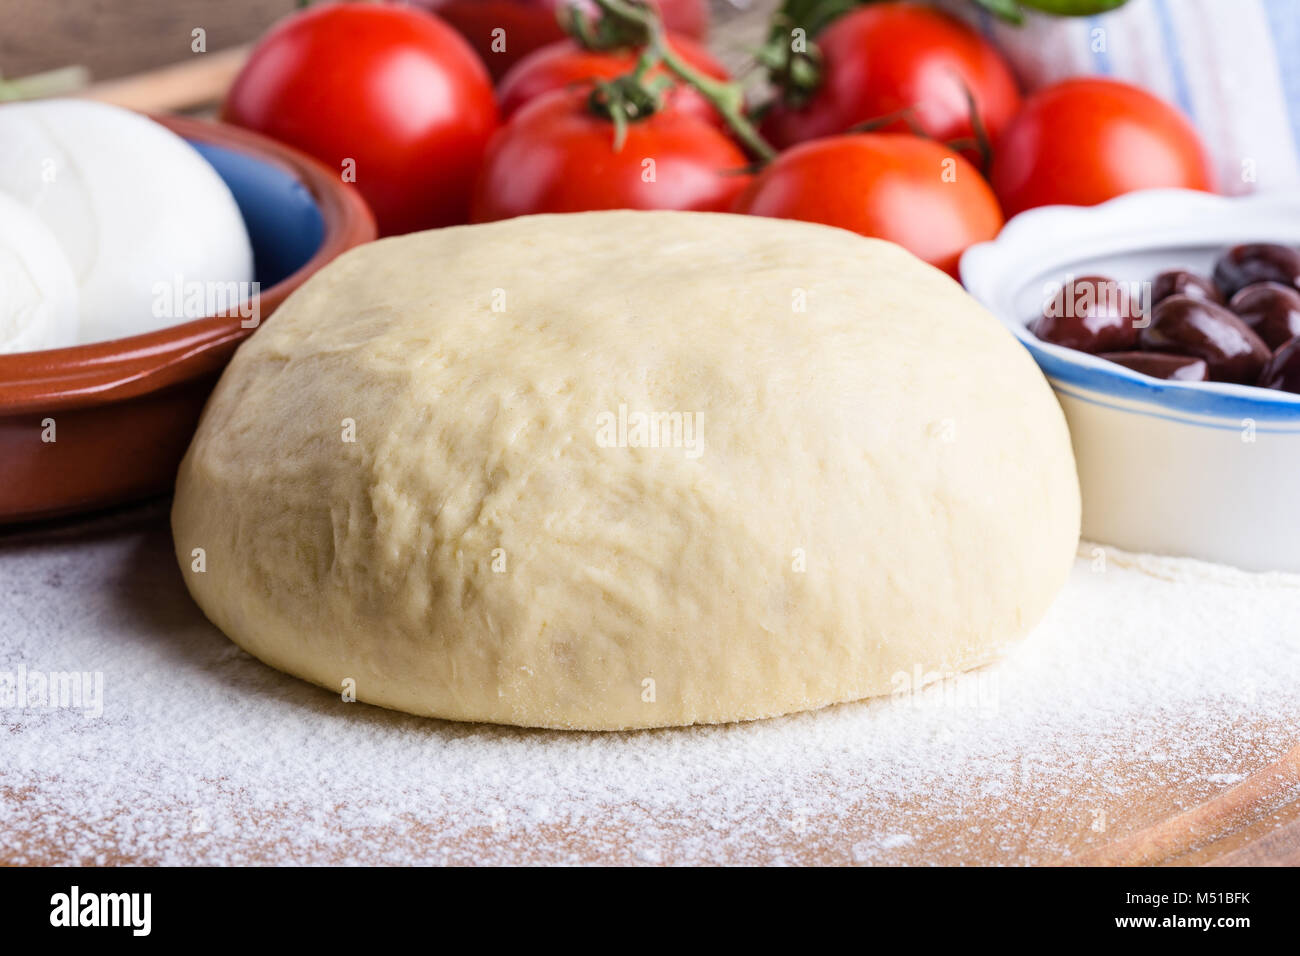 Making gourmet pizza with sprouts topping. Raw pizza dough with ingredients, close-up Stock Photo